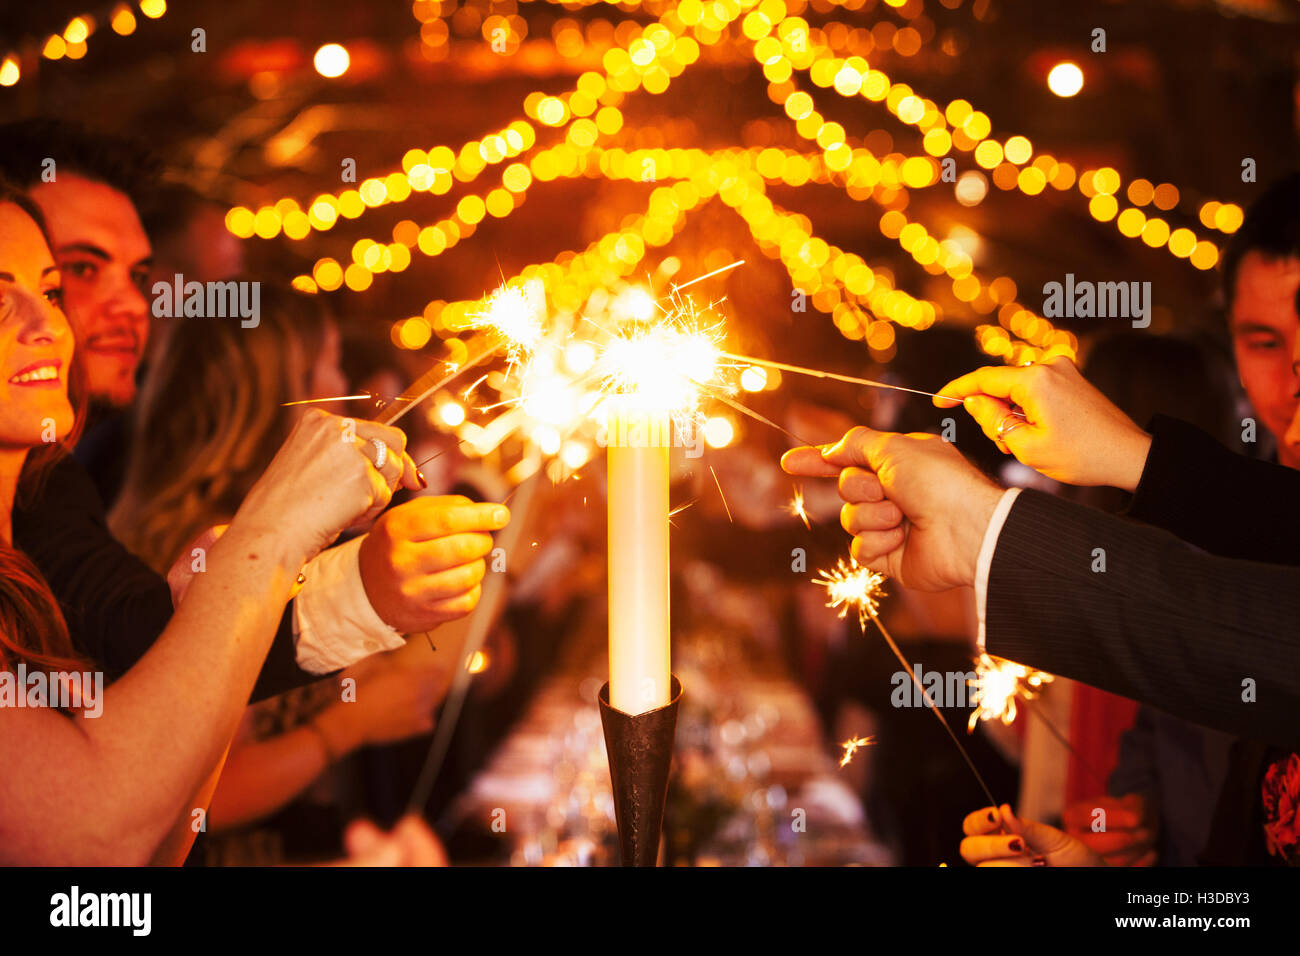 A wedding party. People seated at a long table raising their glasses in a toast. Stock Photo